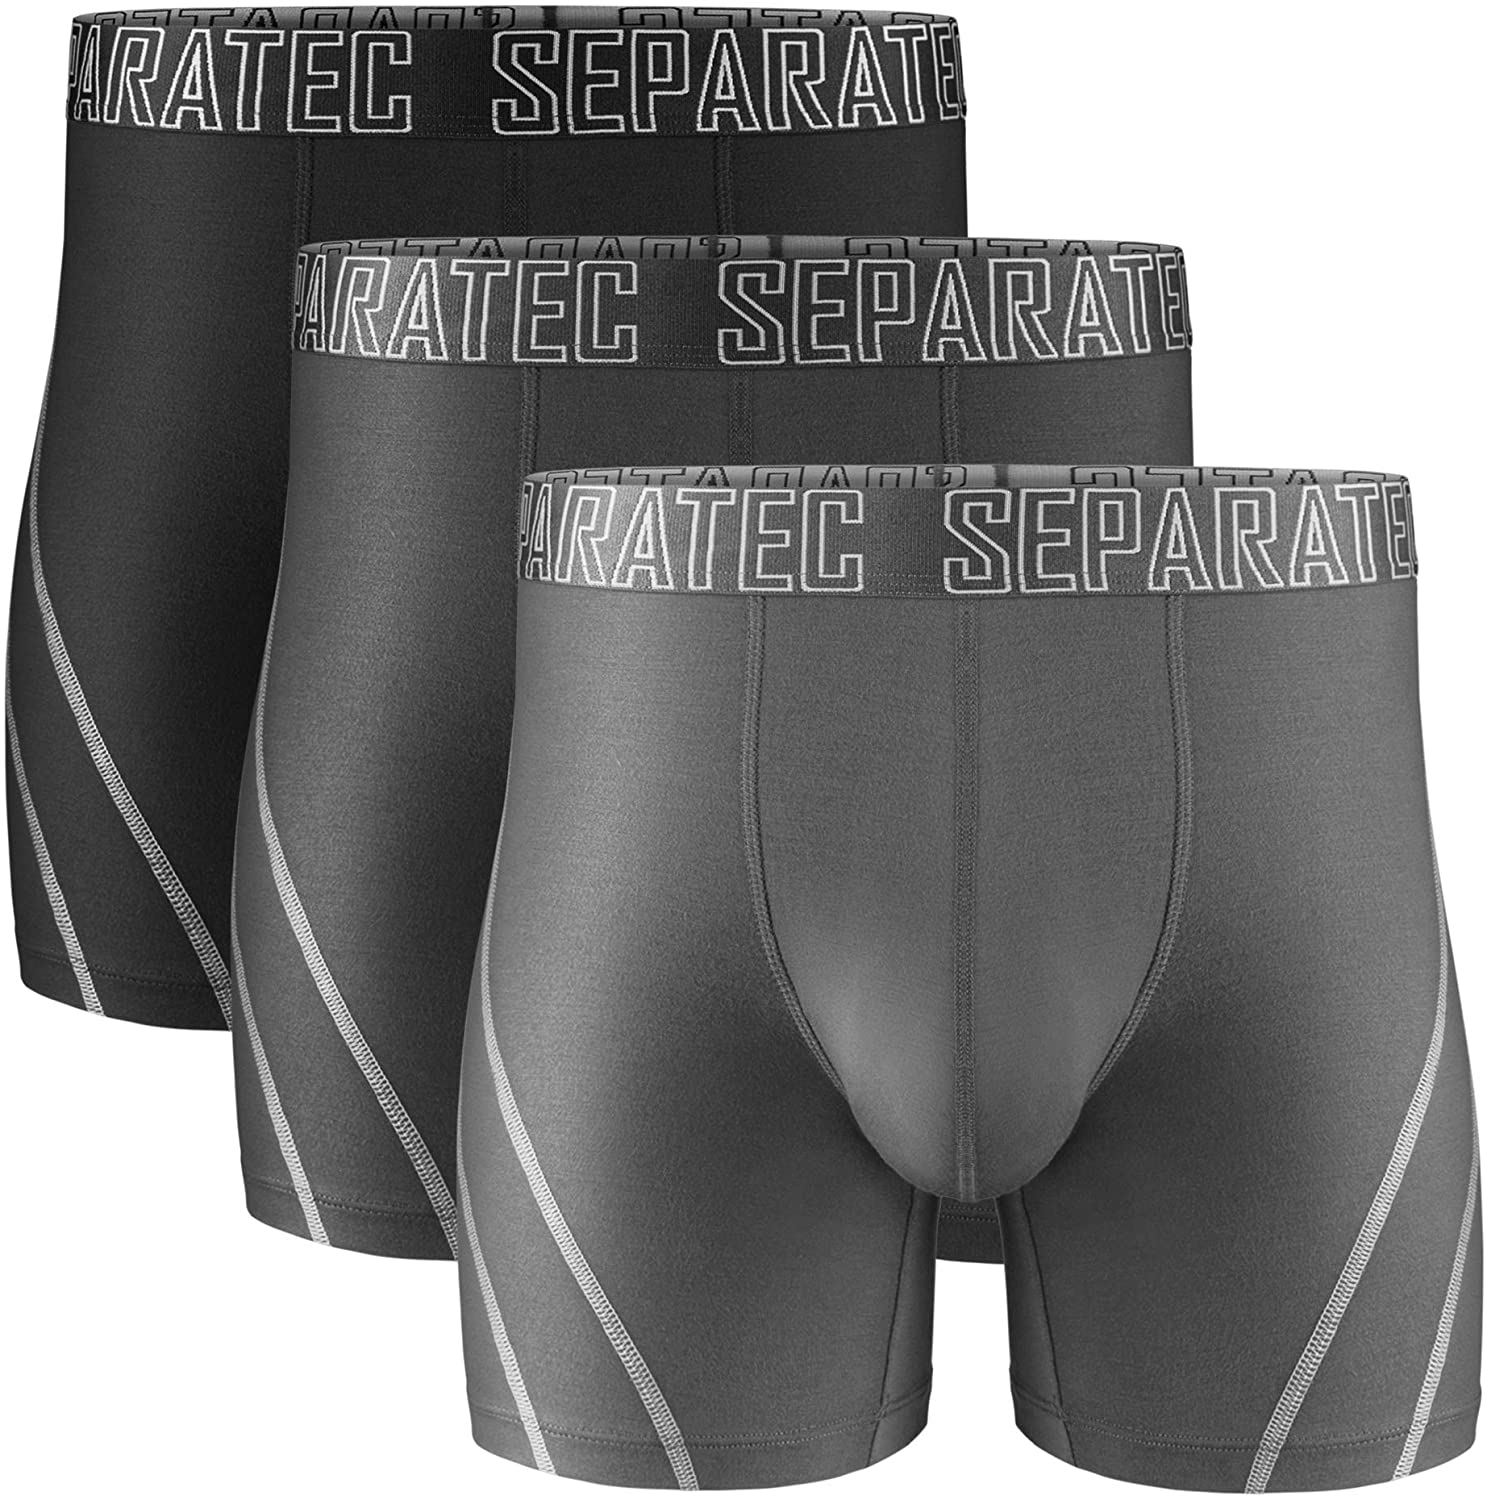 Separatec Men's Underwear 3 Pack Soft and Breathable Bamboo Rayon